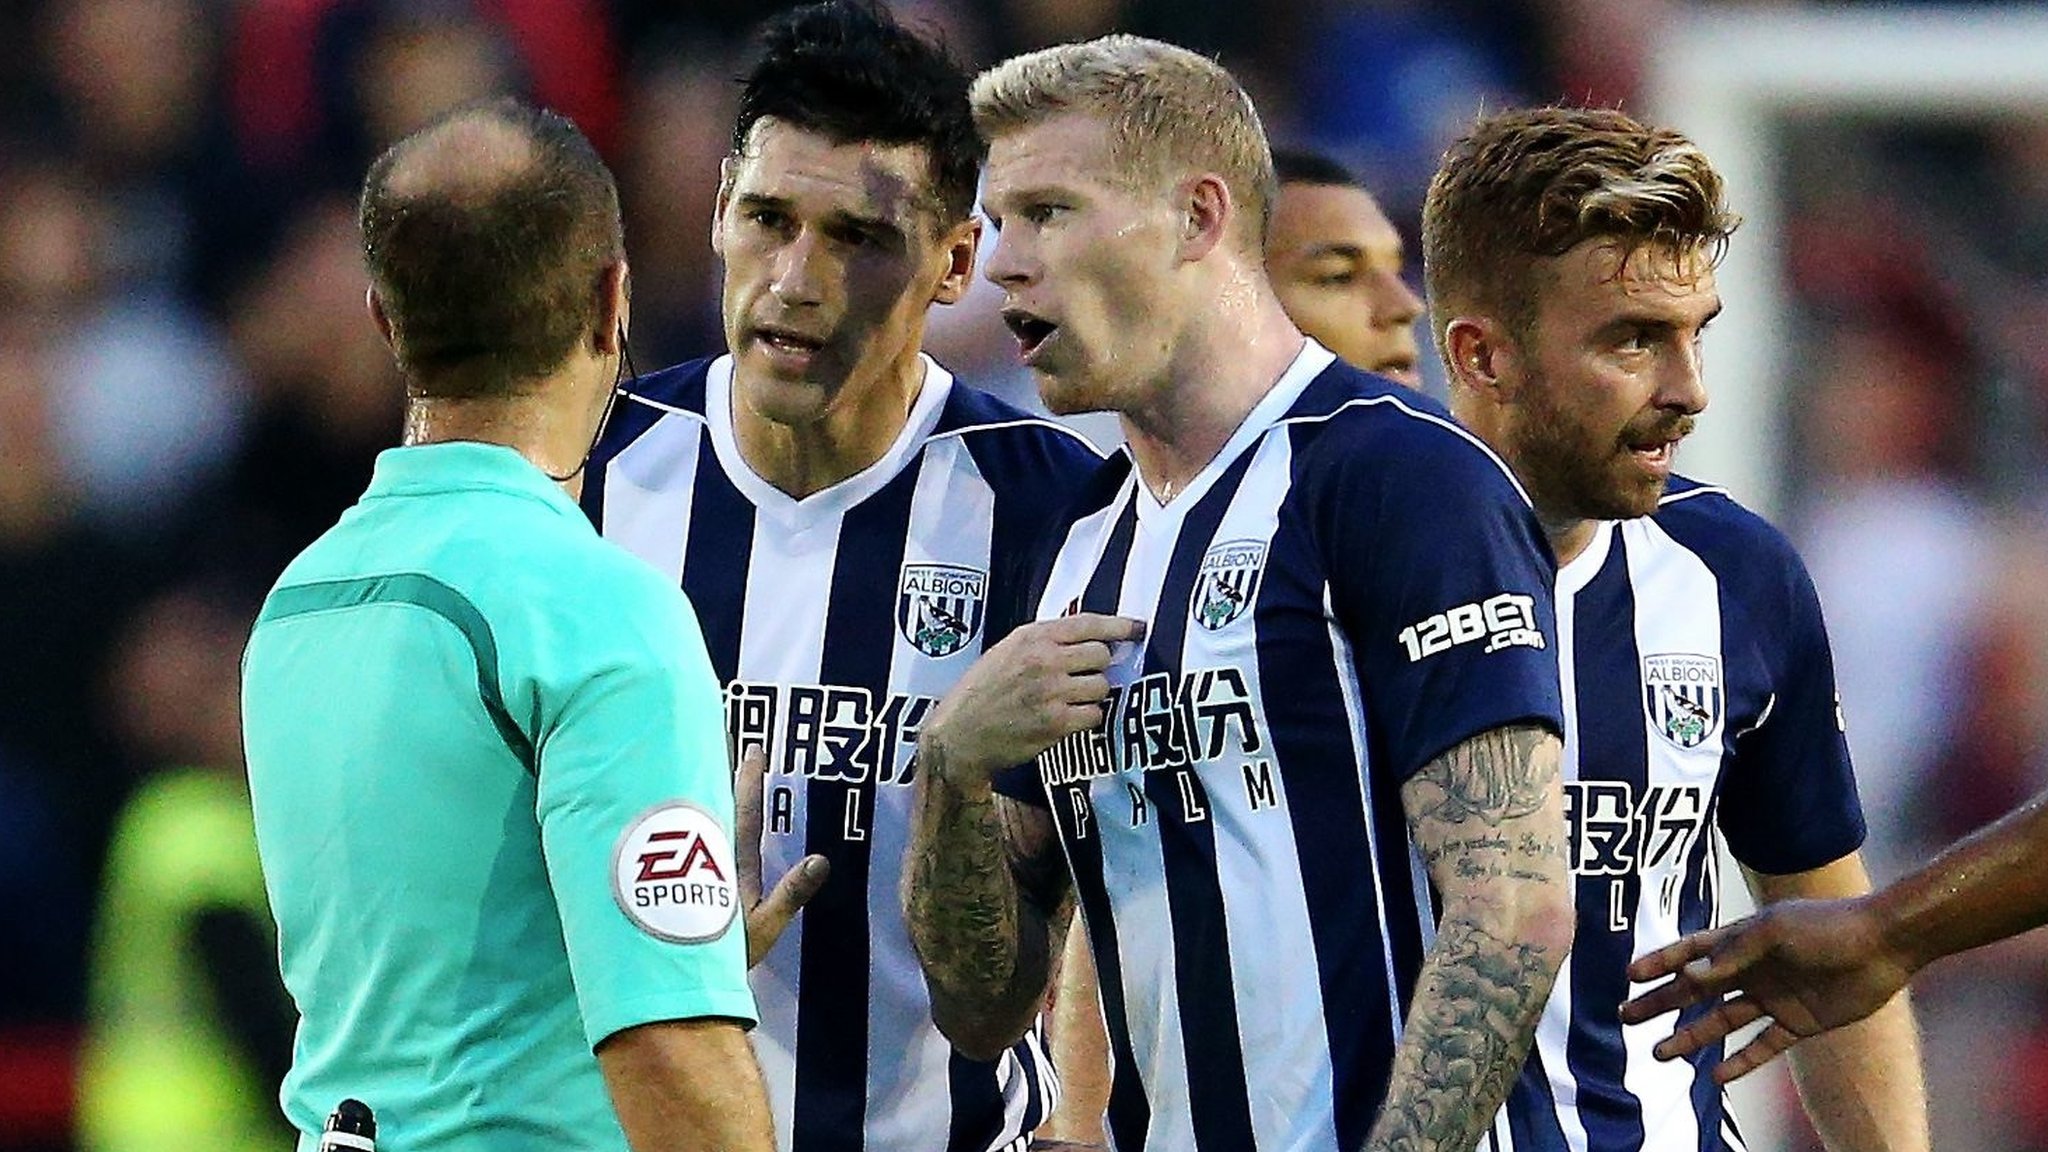 'No stone left unturned' as West Brom aim to change culture at club - Mark Jenkins